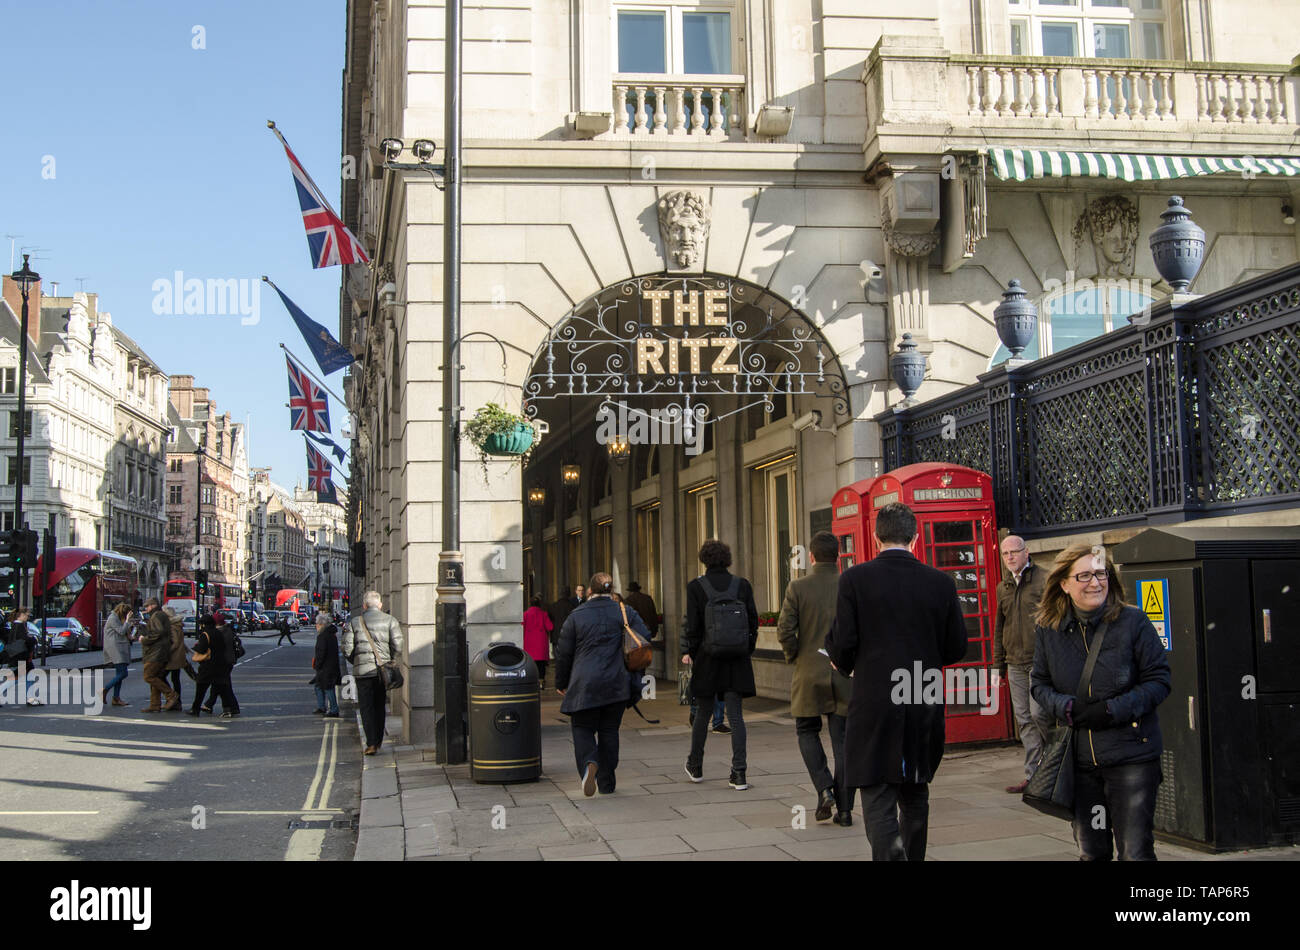 LONDON, UK - JANUARY 28, 2016:  Pedestrians and traffic at the Ritz Hotel arcade in Piccadilly, London on a sunny winter afternoon in central London. Stock Photo